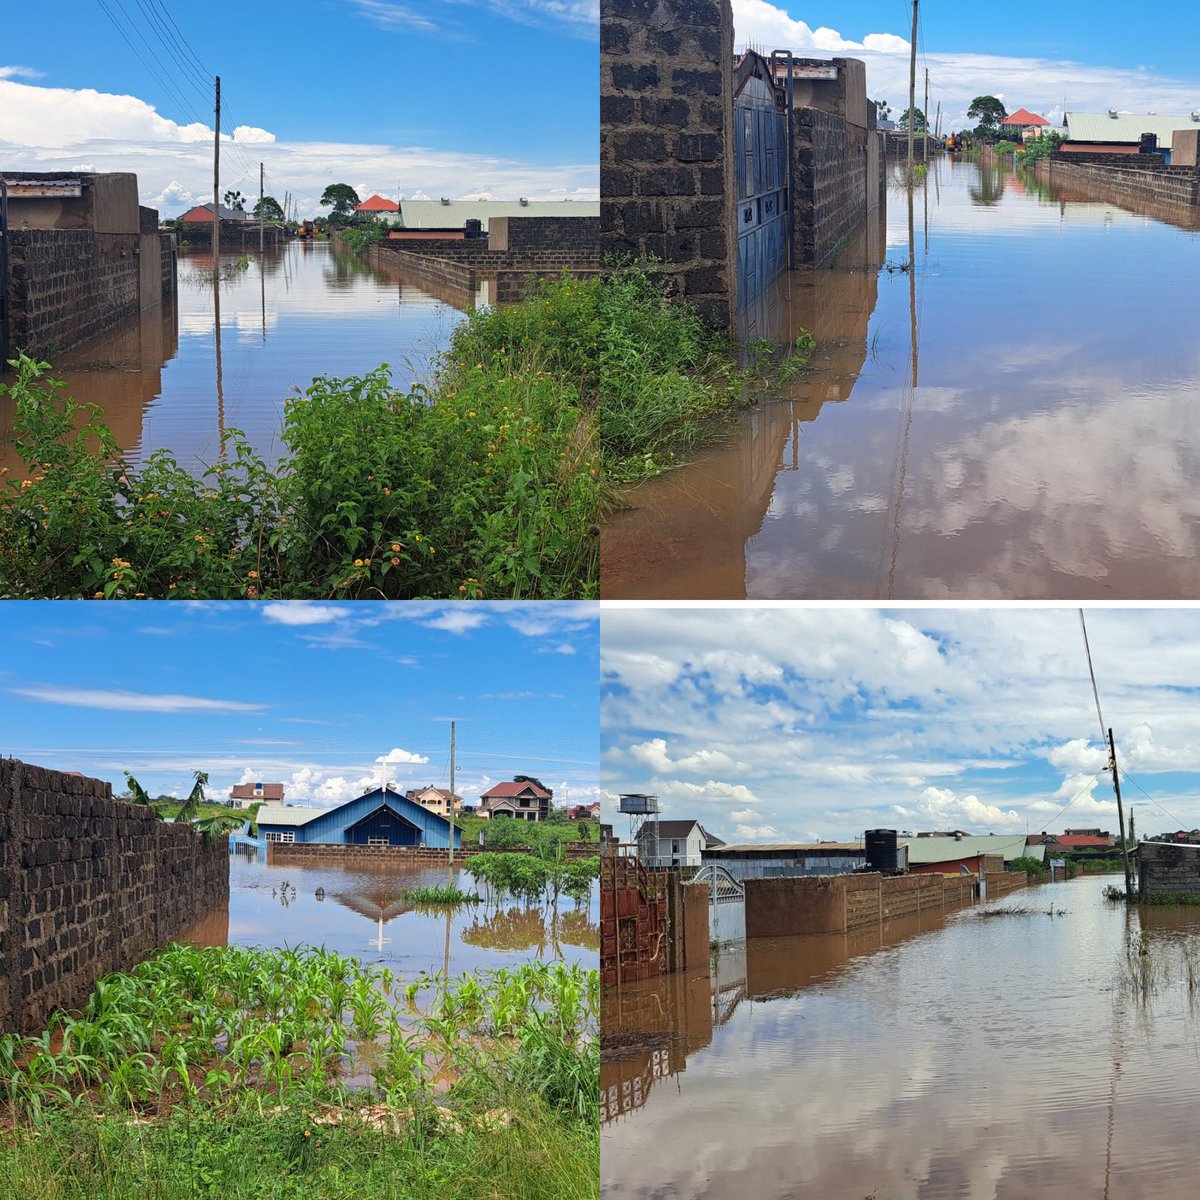 PCEA Macedonia Estate, Olyf Estate among others in Juja Constituency, Kiambu County fully submerged. People say they’re trapped. They were hoodwinked by Kameme/Inooro, corrupt clergy, illiterate millionaire celebs to vote for prolific idiots @KWamatangi & MP Koimburi and UDA